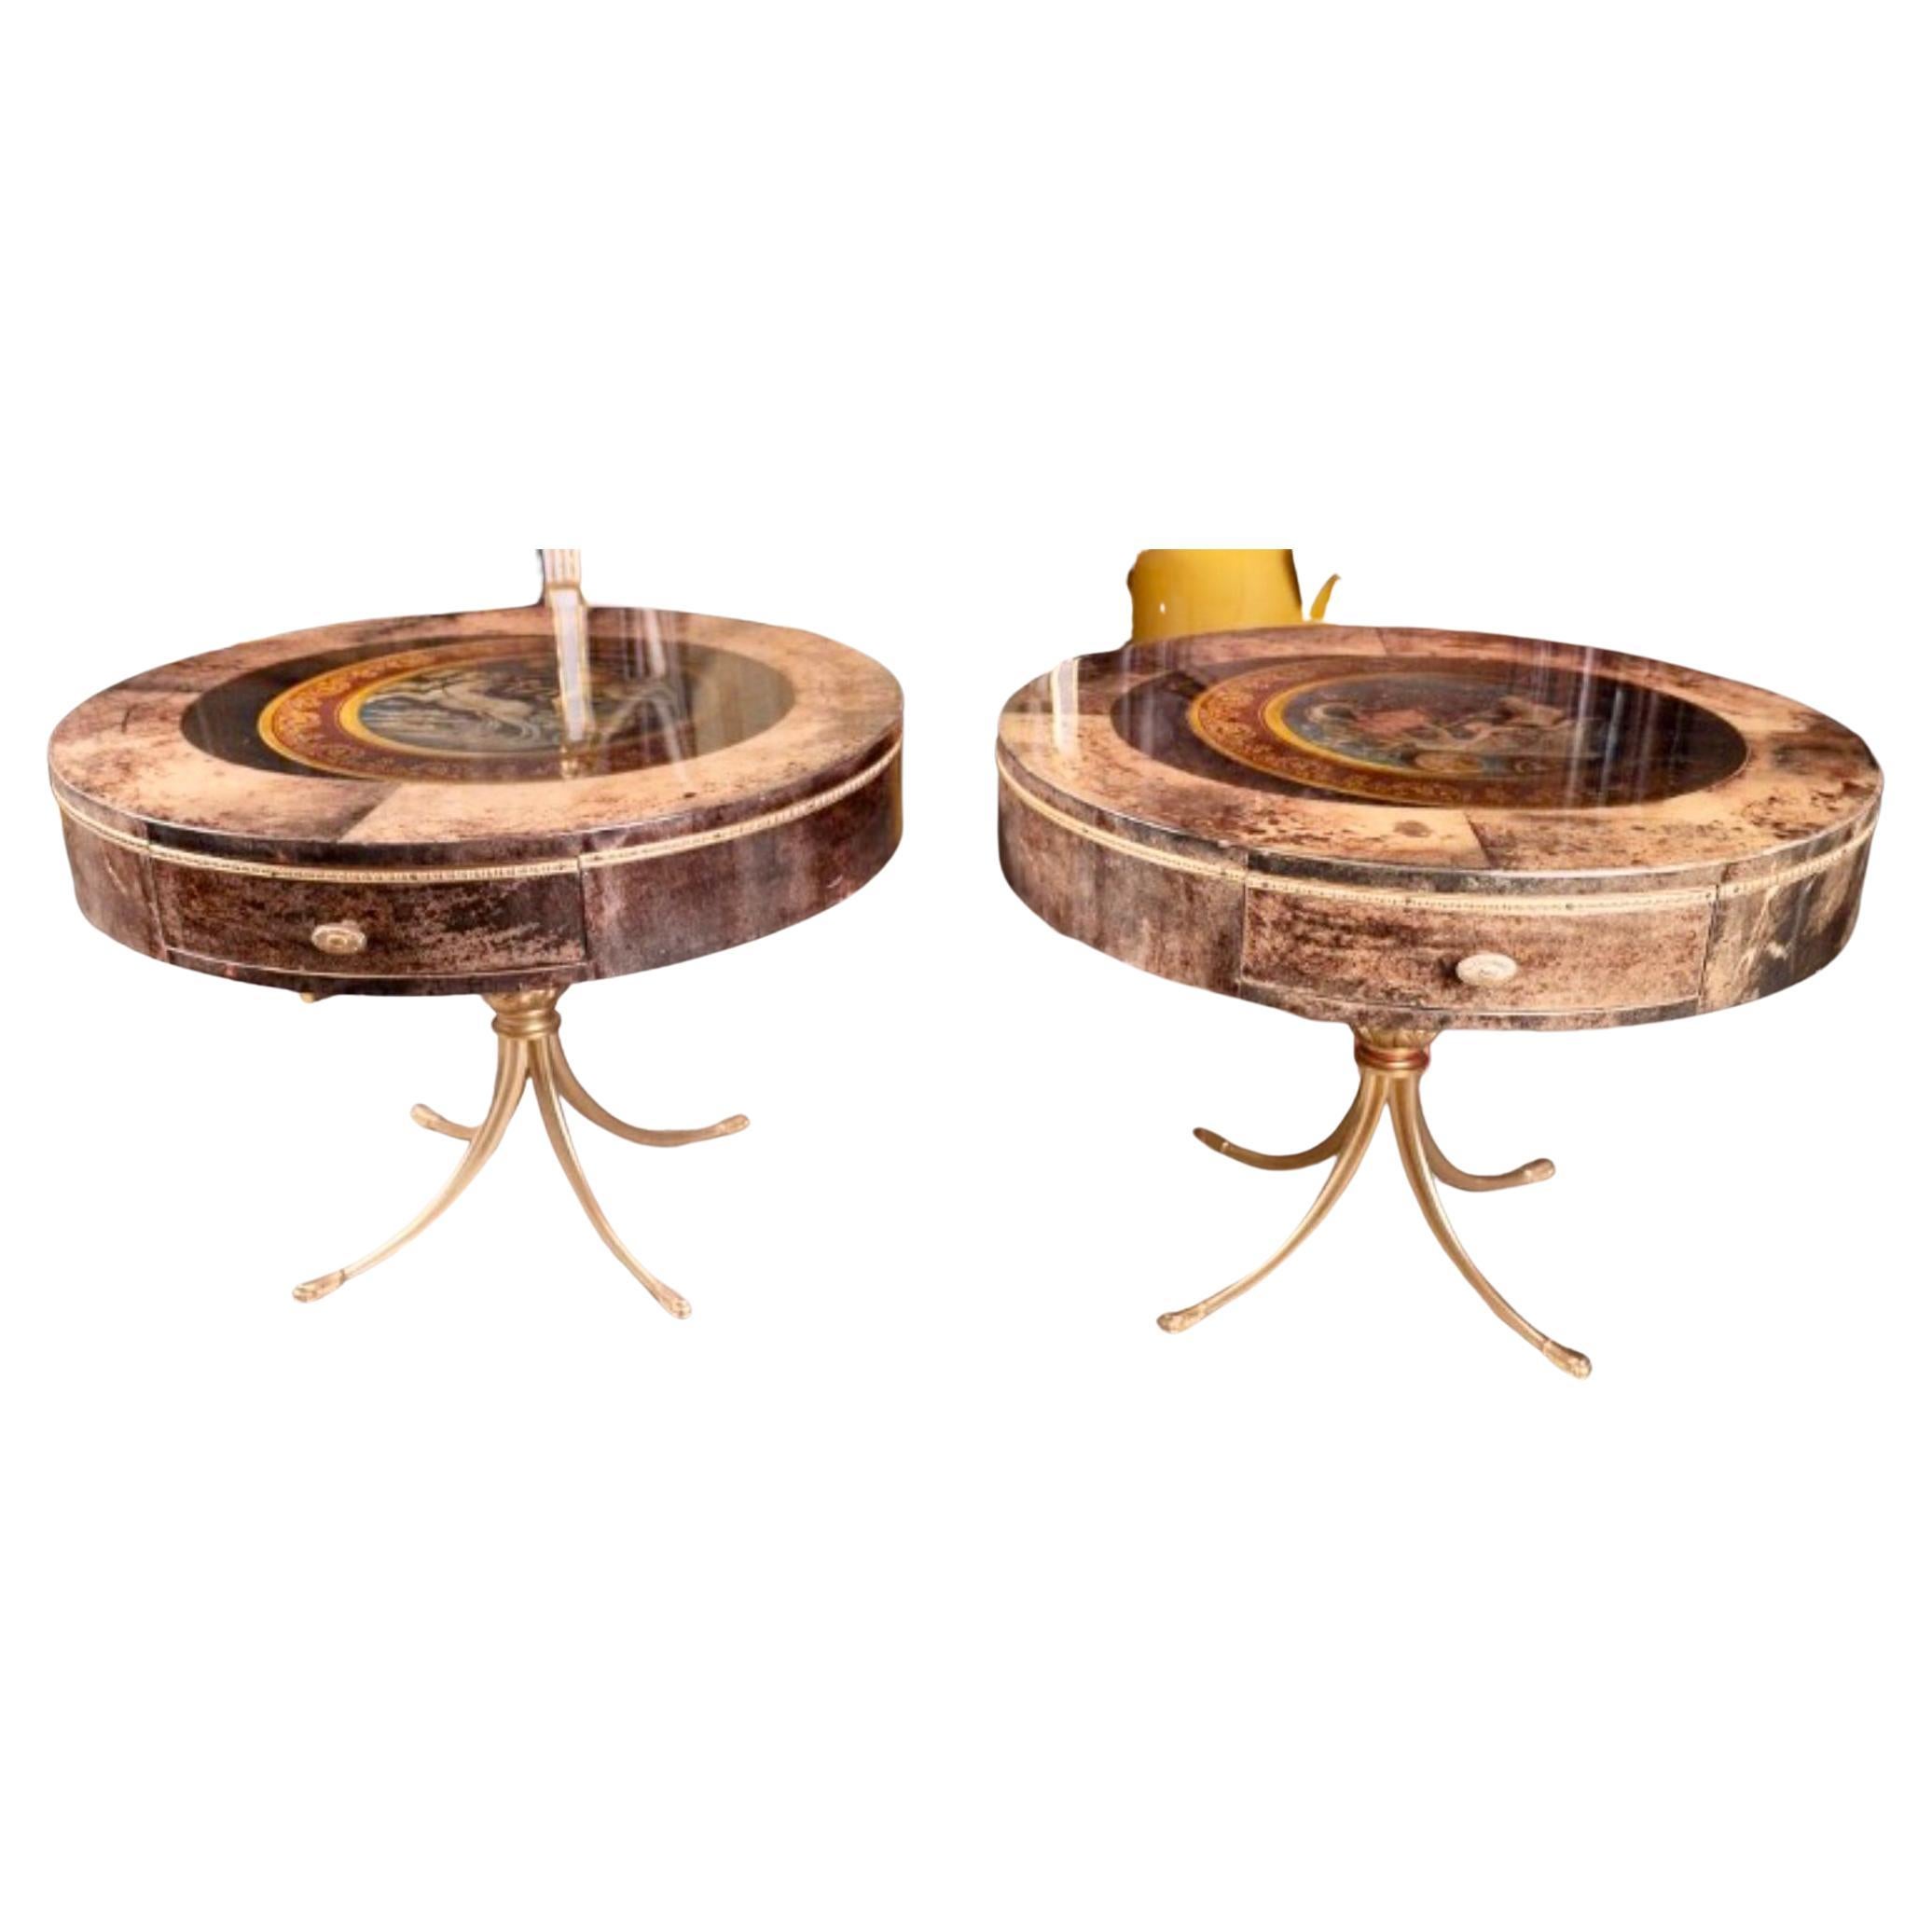 Fantastic Pair of Aldo Tura Lacquered Tables For Sale